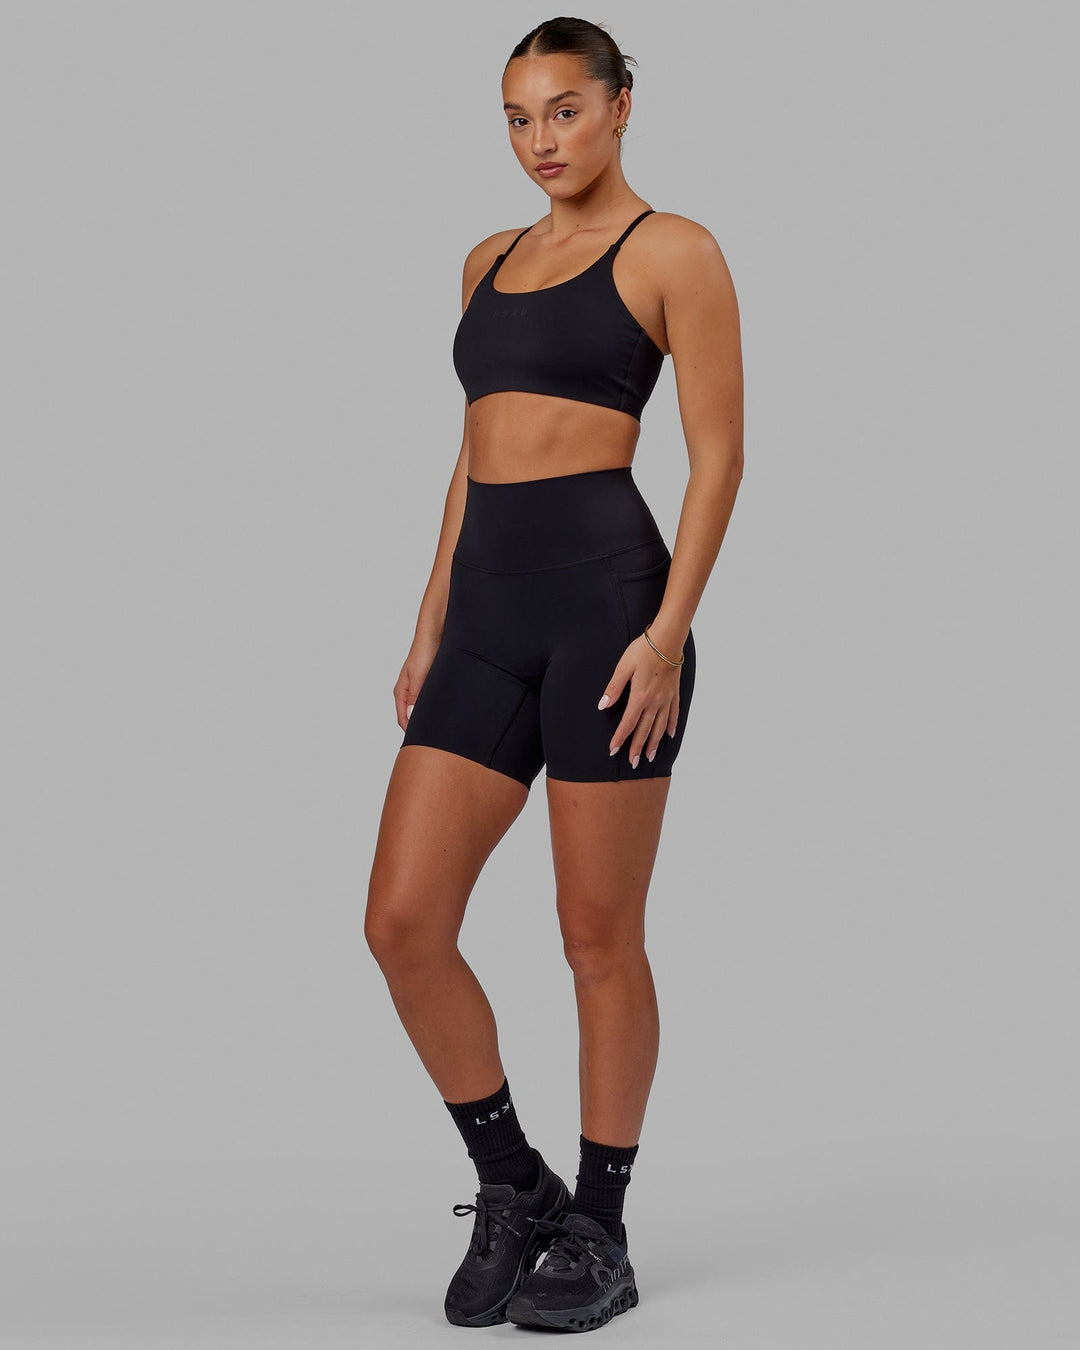 Woman wearing Elixir Mid Short Tight with Pockets - Black